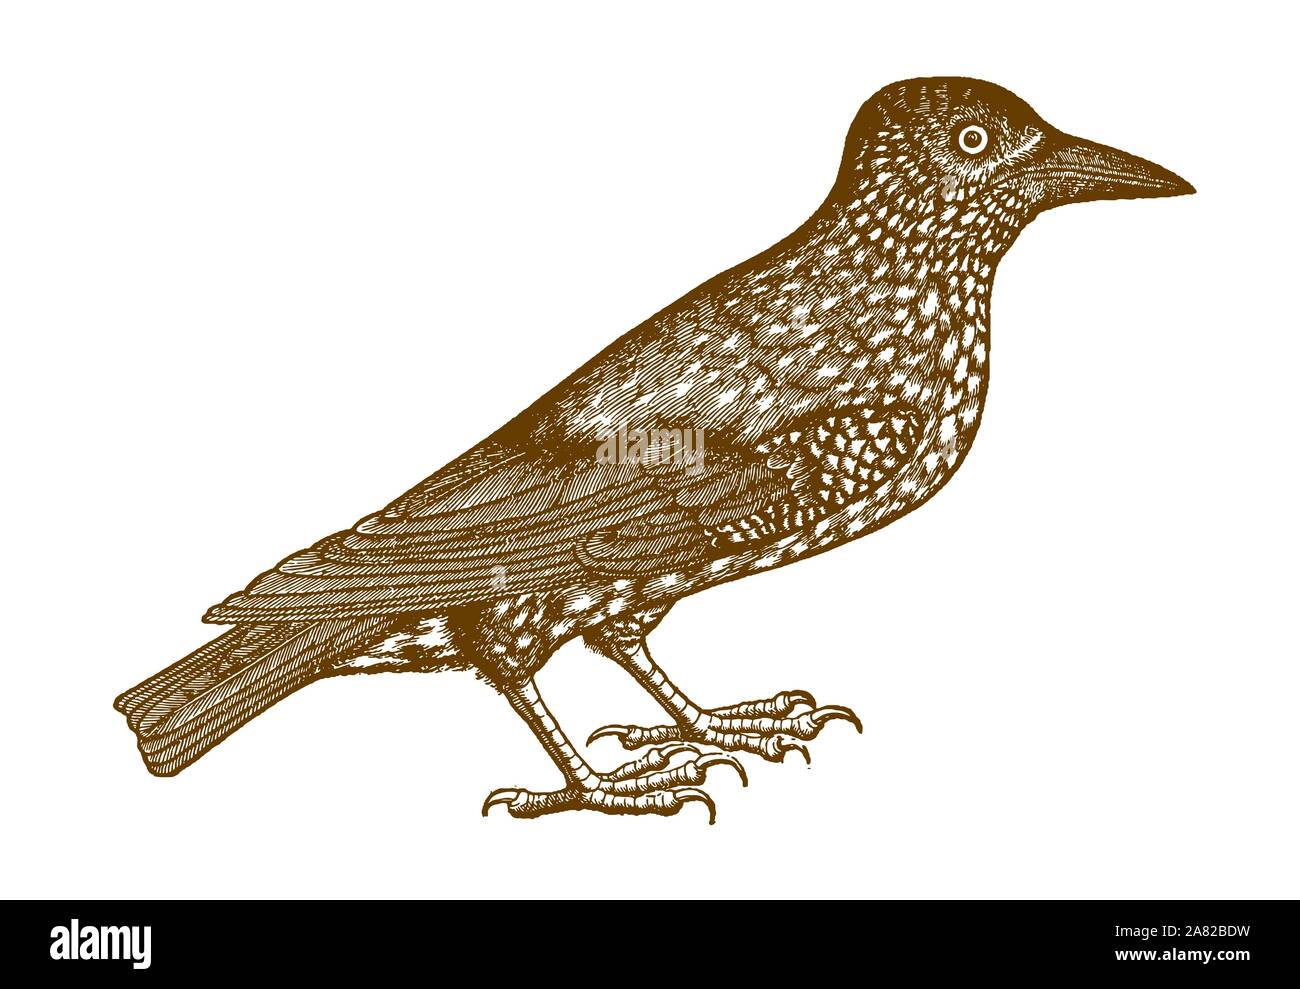 Spotted nutcracker (nucifraga caryocatactes) in side view. Illustration after a historic woodcut from the 16th century Stock Vector